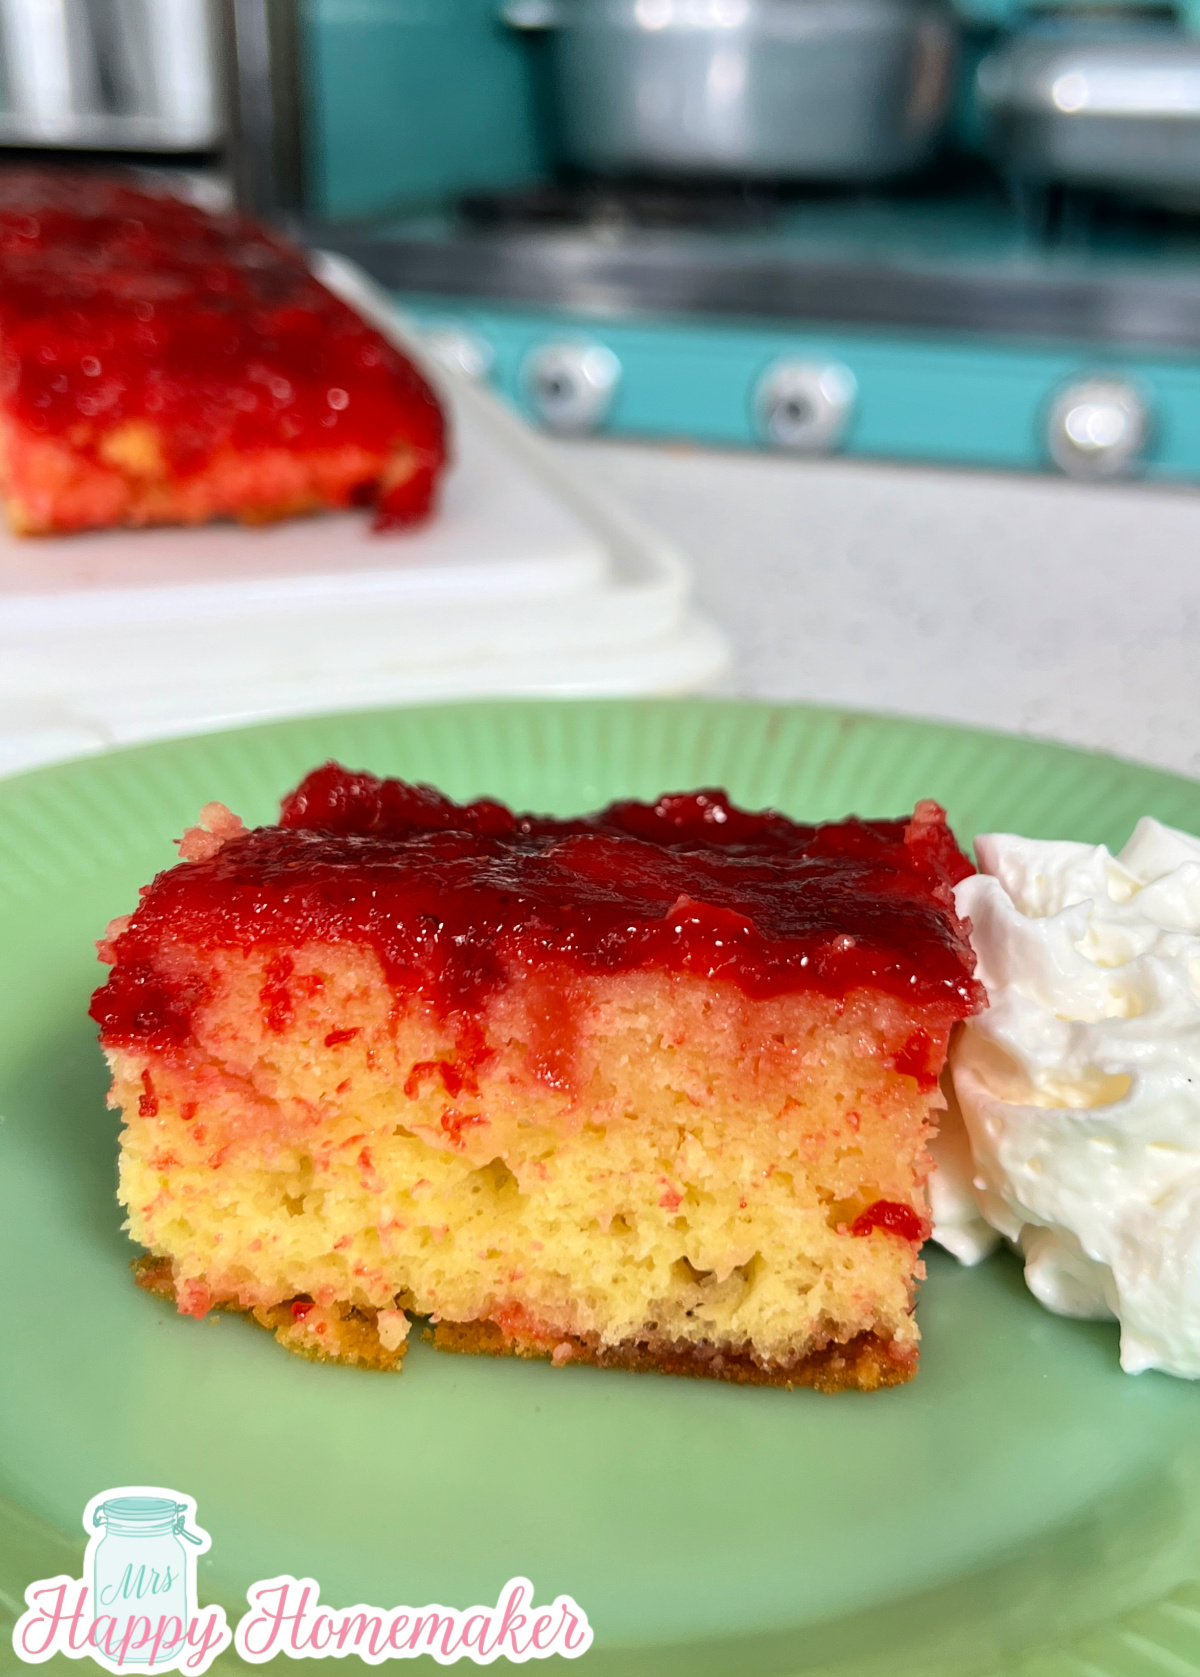 A slice of strawberry upside down cake on a green plate with a blue stove in the background